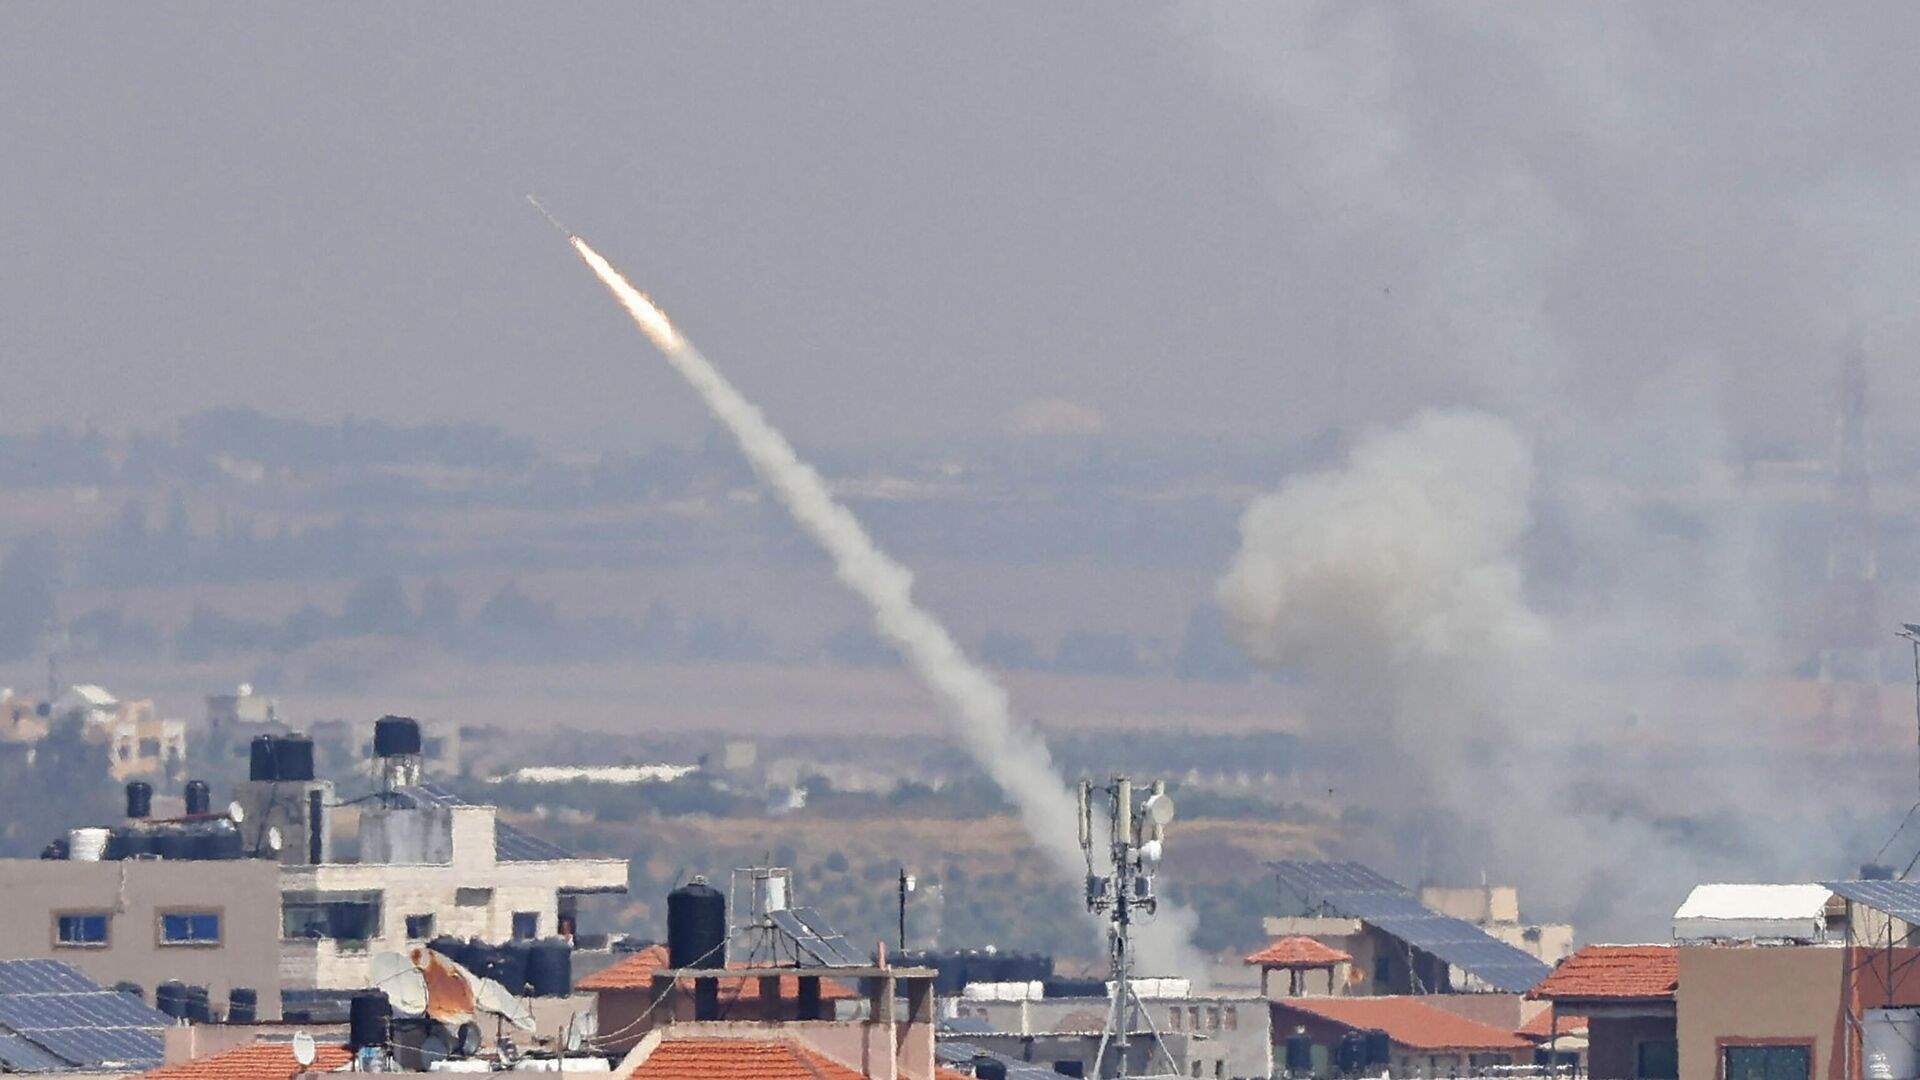 Sudden Rocket Barrage: Escalation of Tensions as Gaza Launches Dozens of Rockets Towards Israel